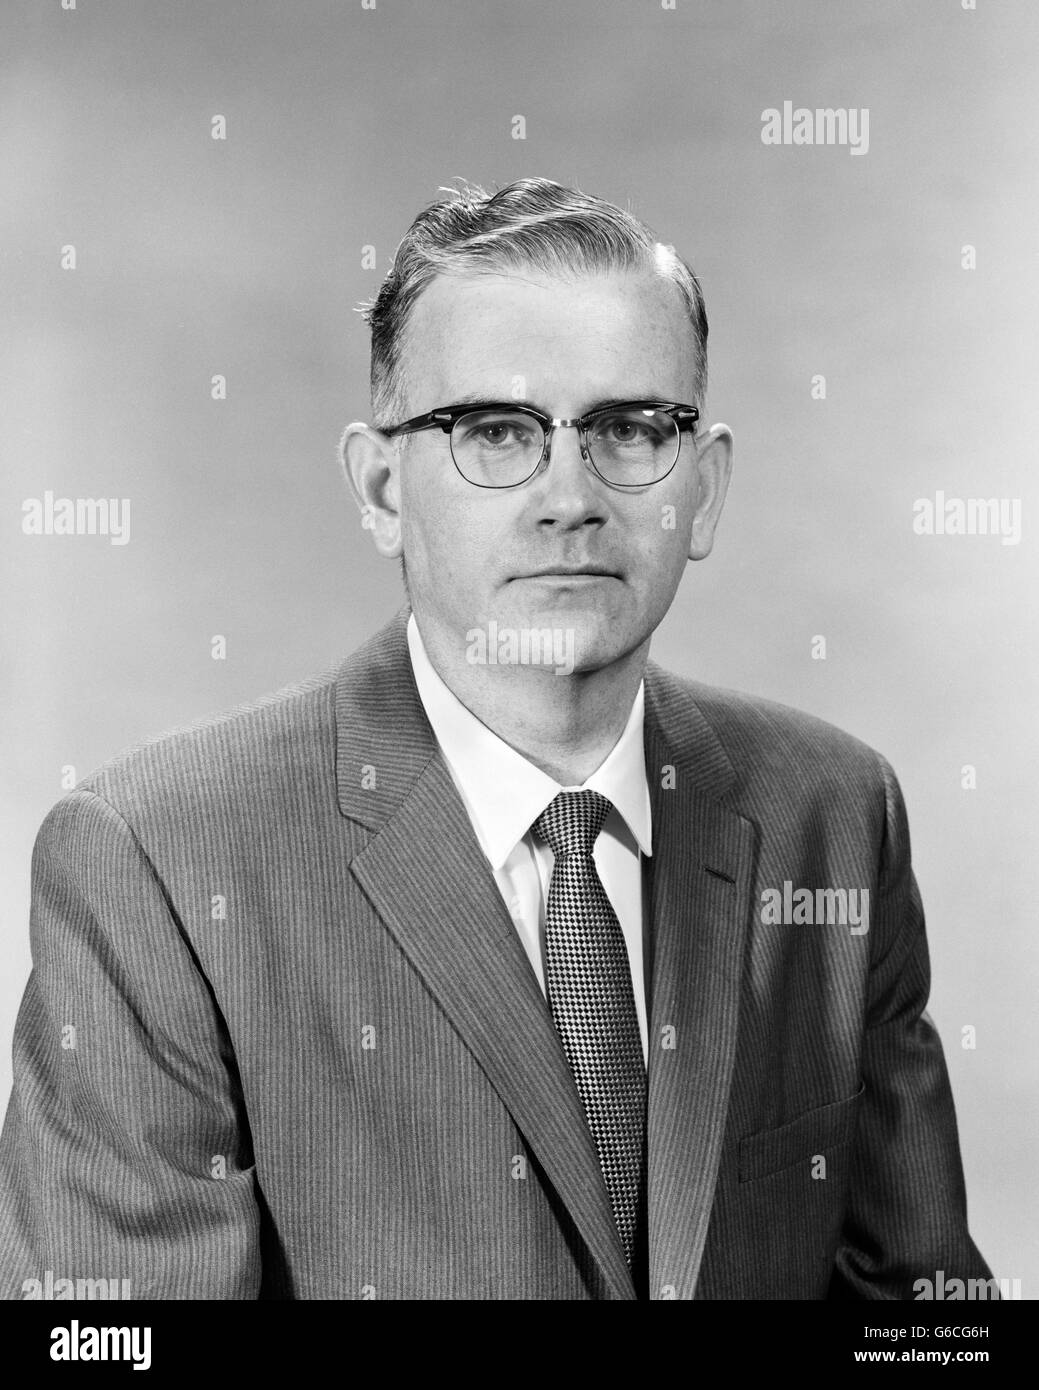 1950s PORTRAIT MAN WEARING GLASSES SUIT JACKET NECKTIE LOOKING AT CAMERA  Stock Photo - Alamy